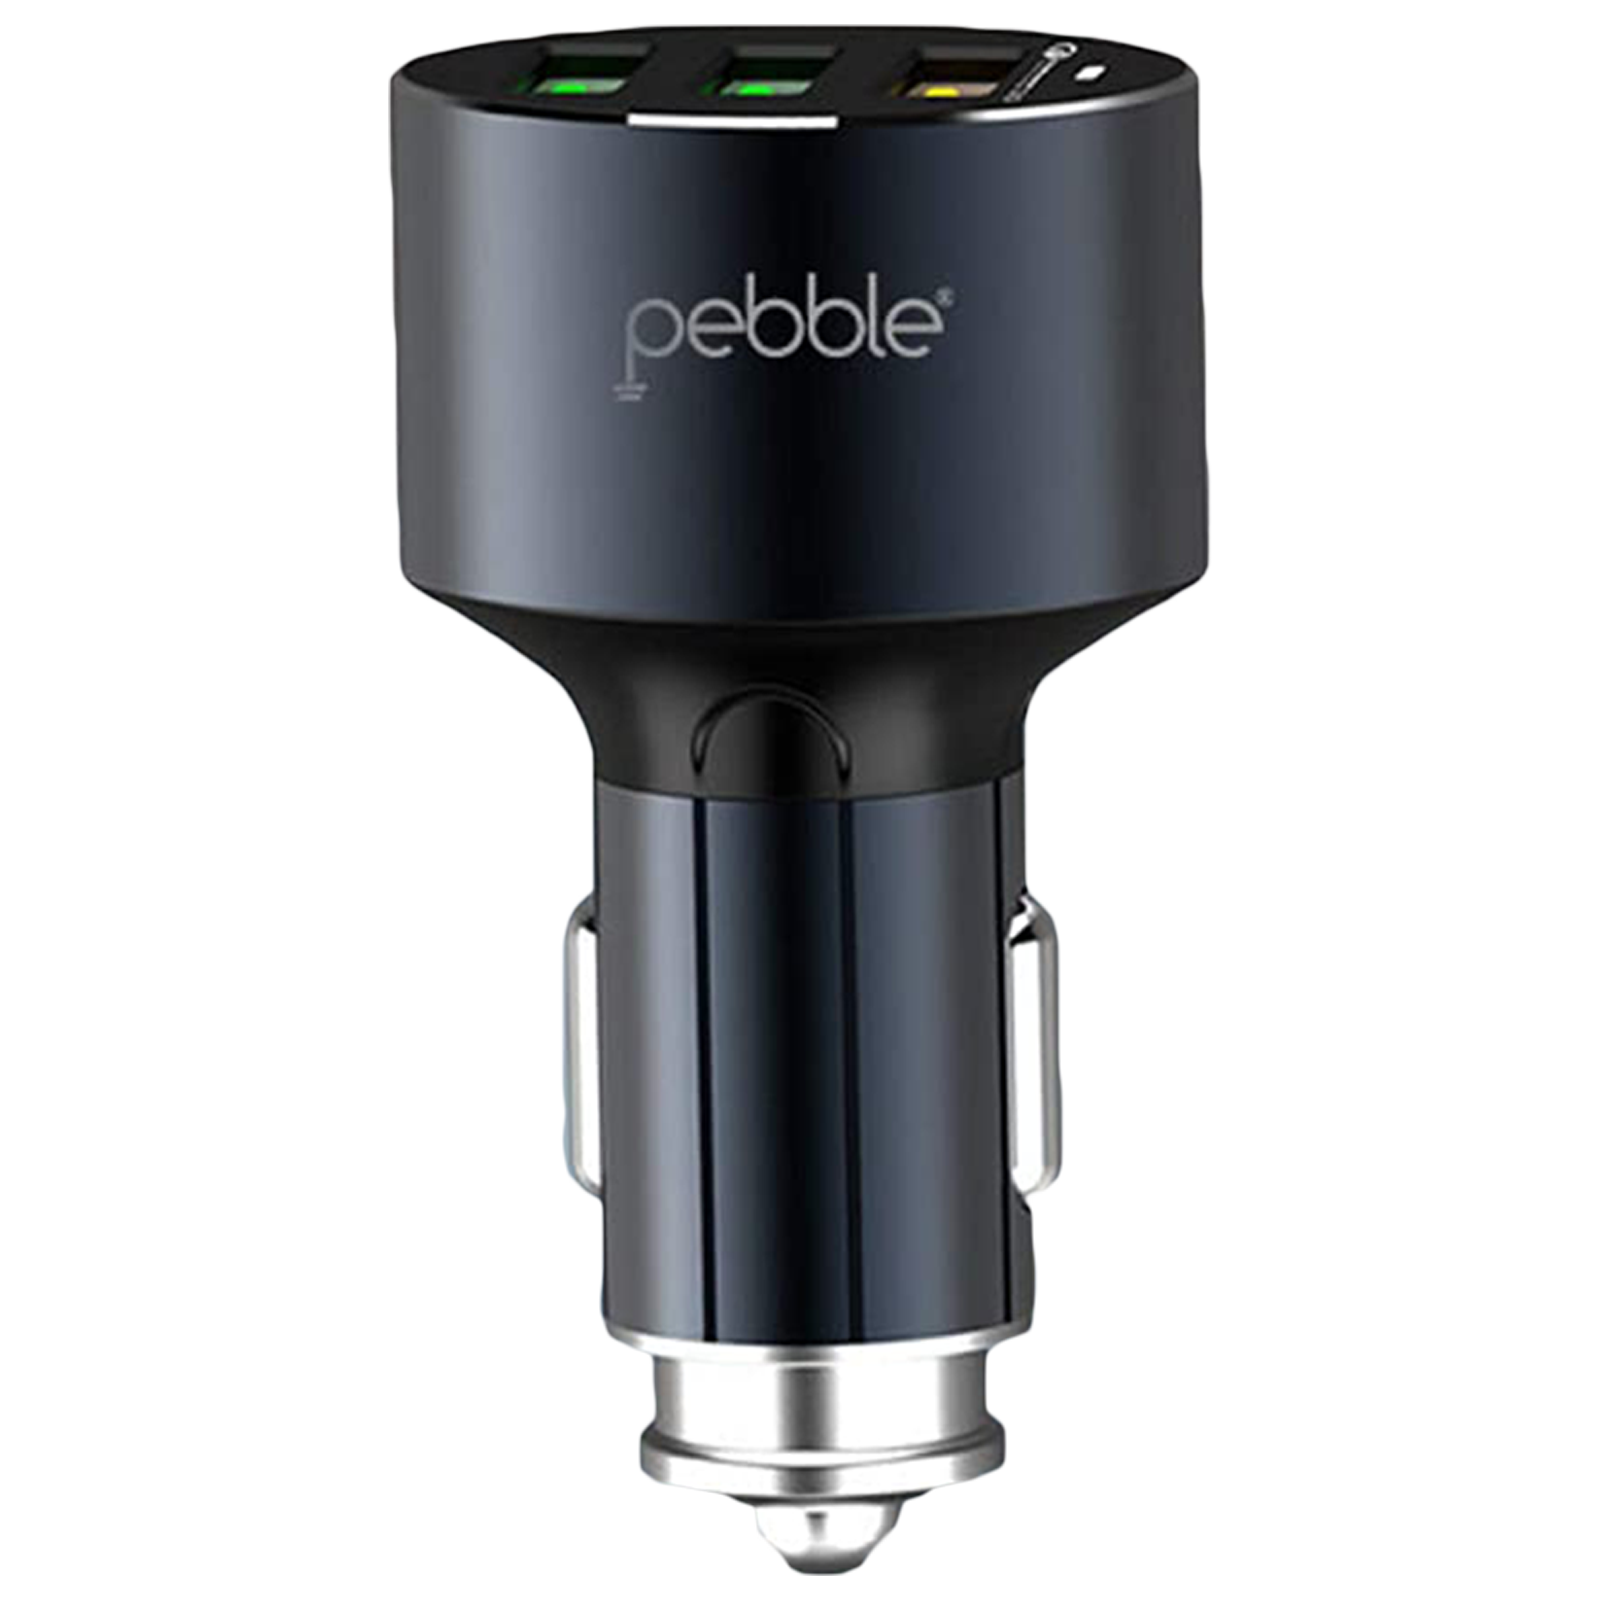 Pebbles - Pebble 36 Watts/3.6 Amps 3 USB Ports Car Charging Adapter with Cable (Quick Charge 3.0 Support, PCC3Q, Black)